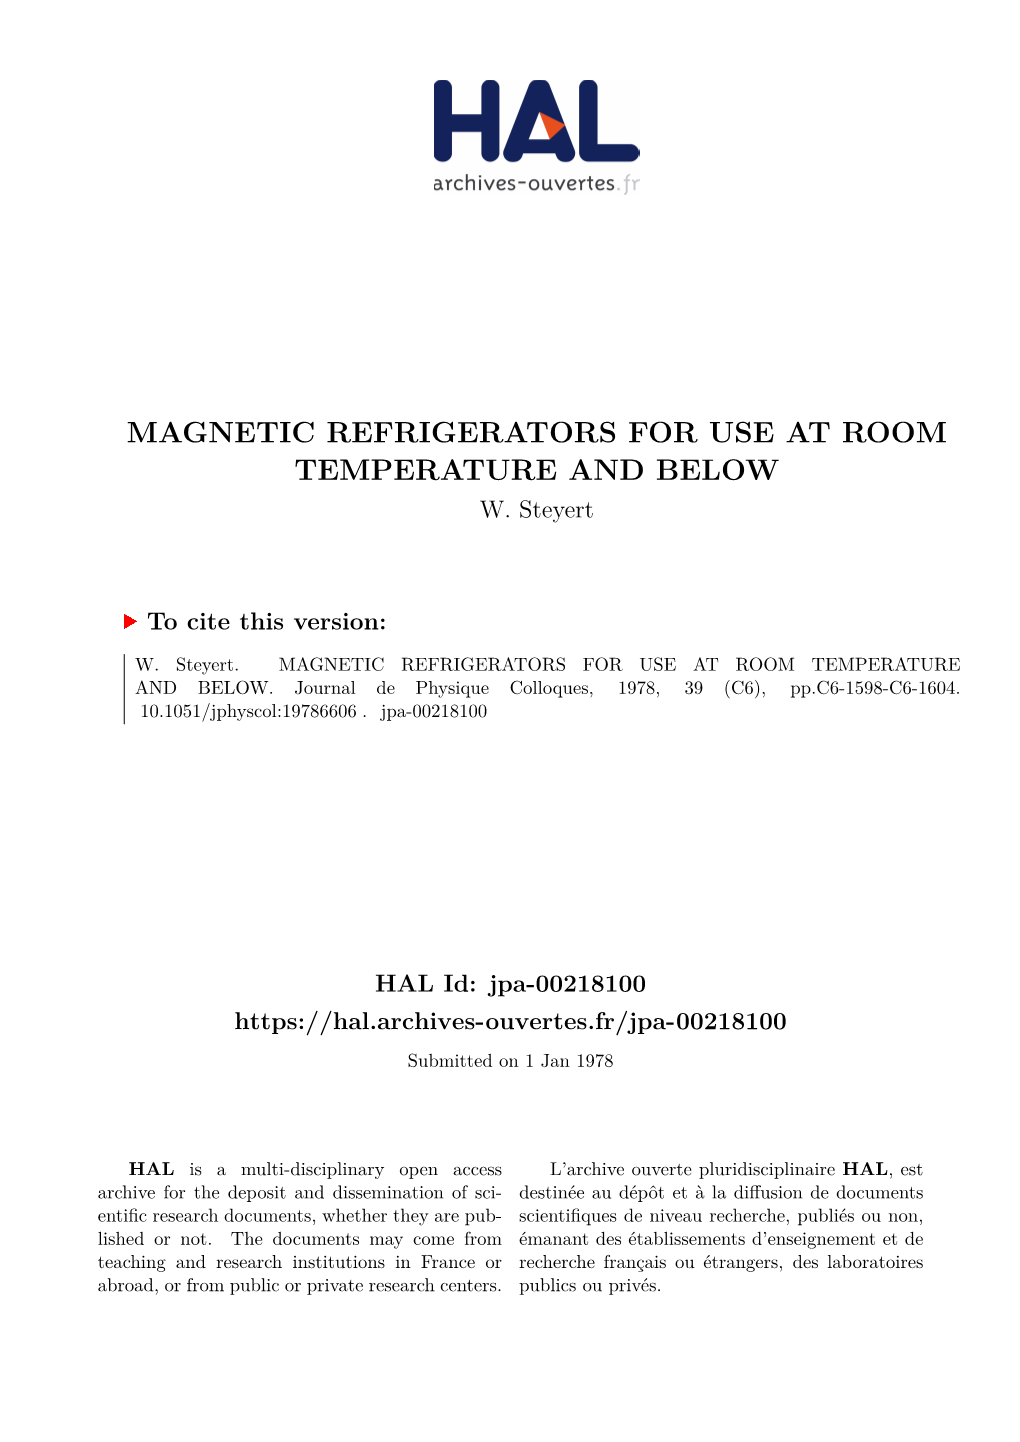 Magnetic Refrigerators for Use at Room Temperature and Below W